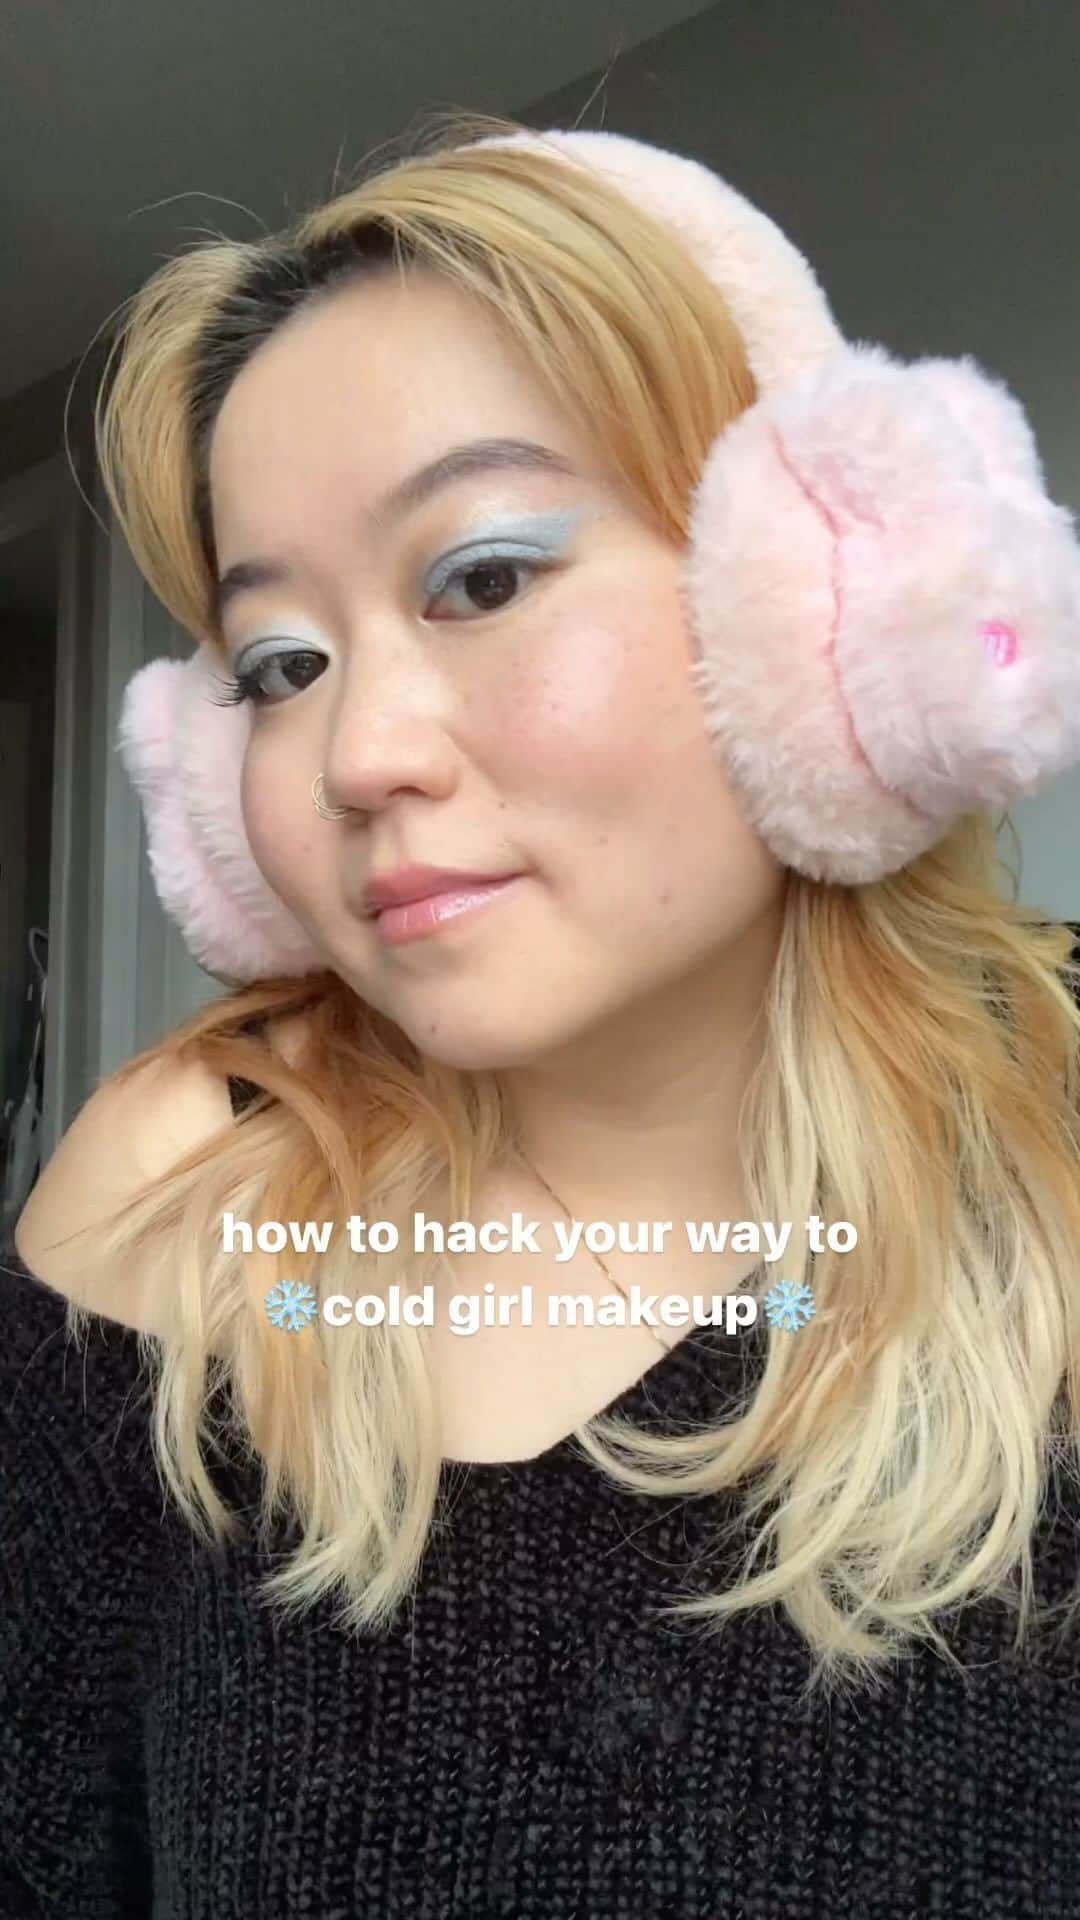 Milk Makeupのインスタグラム：「It’s time to chill ❄️ Here’s how you can hack your way to the #coldgirlmakeup look using all your favorite Milk Makeup products  @iley.c (she/they) wears: ✨ Color Chalk in Freeze ✨ Hydro Grip Set + Refresh Spray ✨ Bionic Blush in Fly ✨ Lip + Cheek in Werk ✨ Odyssey Lip Oil Gloss in Globetrot」